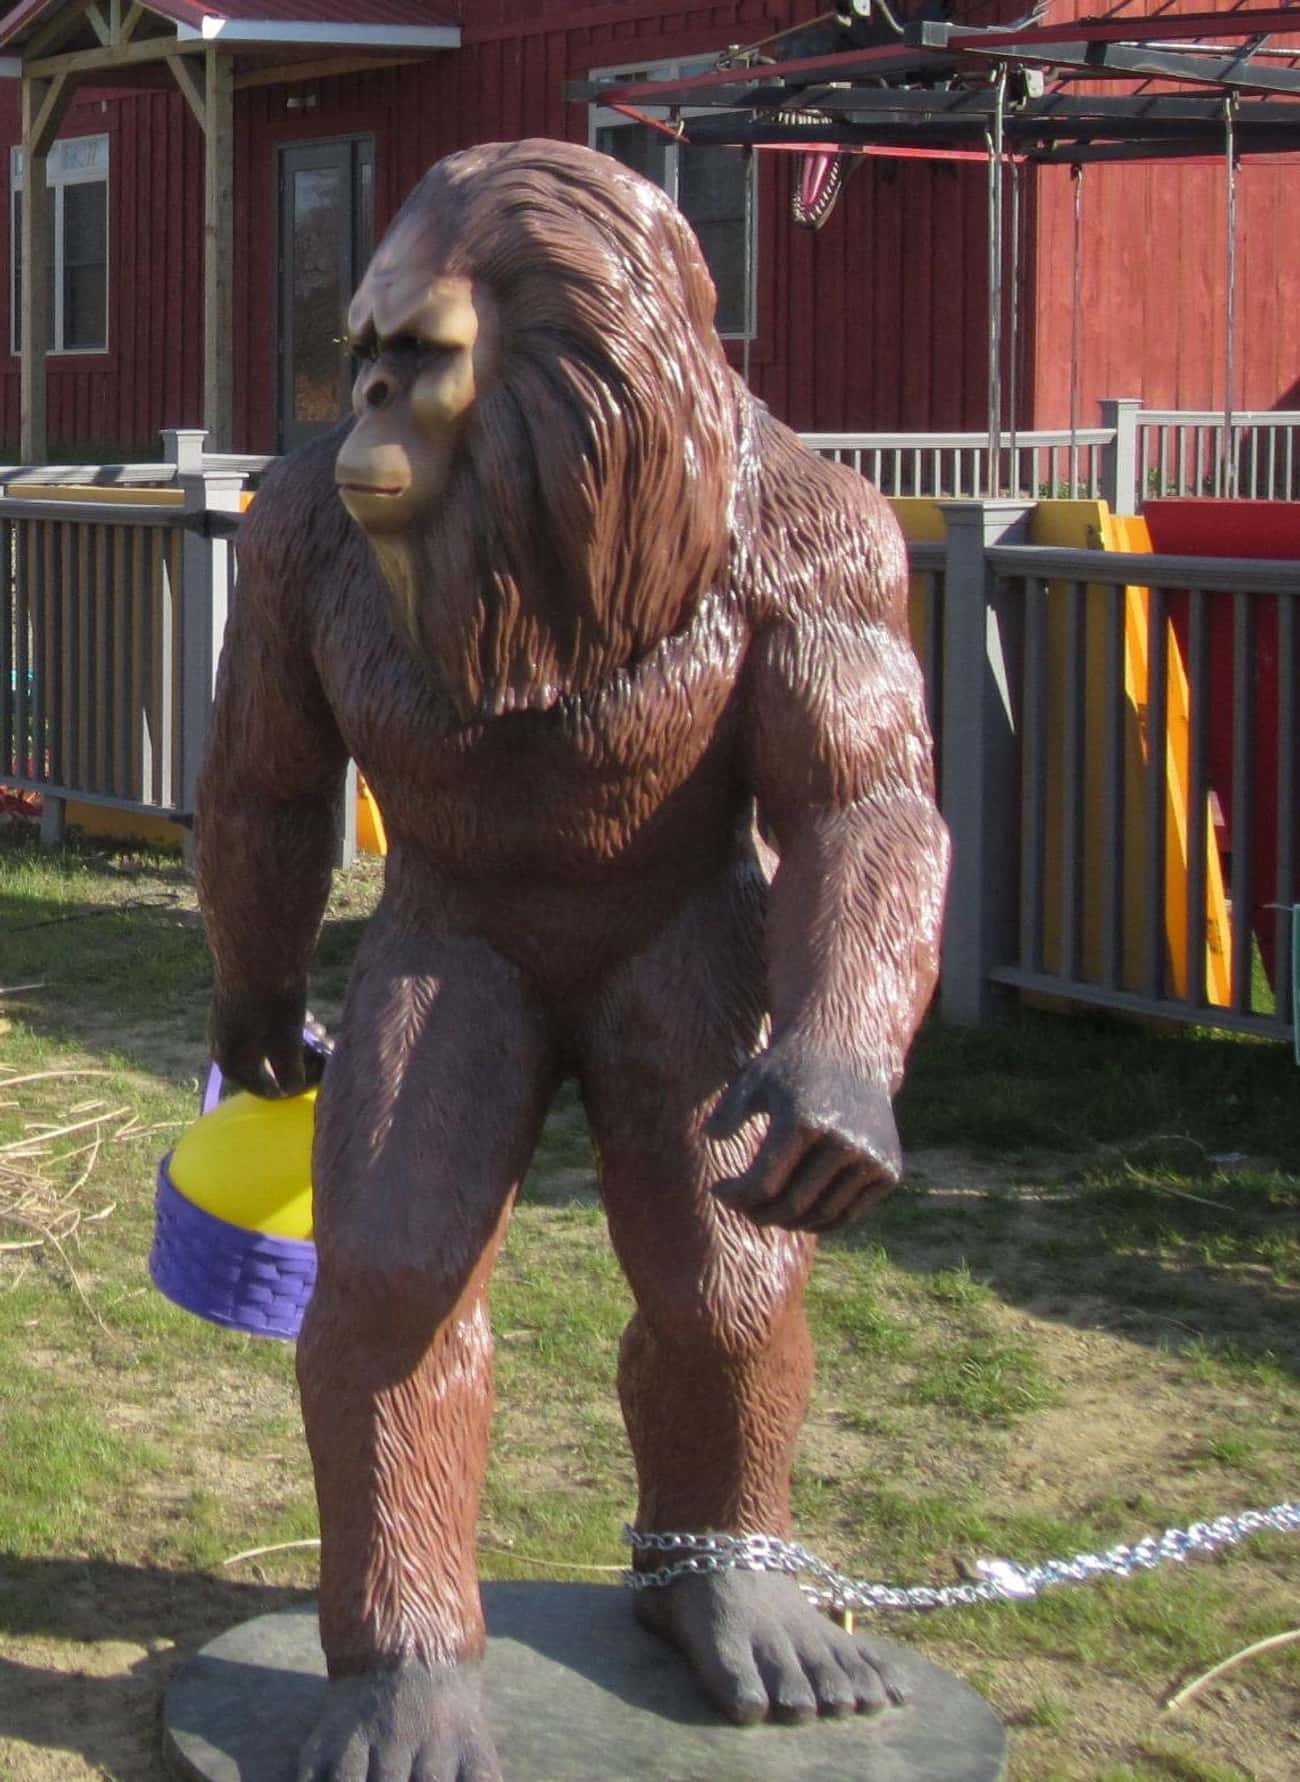 Some Bigfoot Enthusiasts Believe A 'Gigantopithecus' Was Able To Cross The Bering Strait